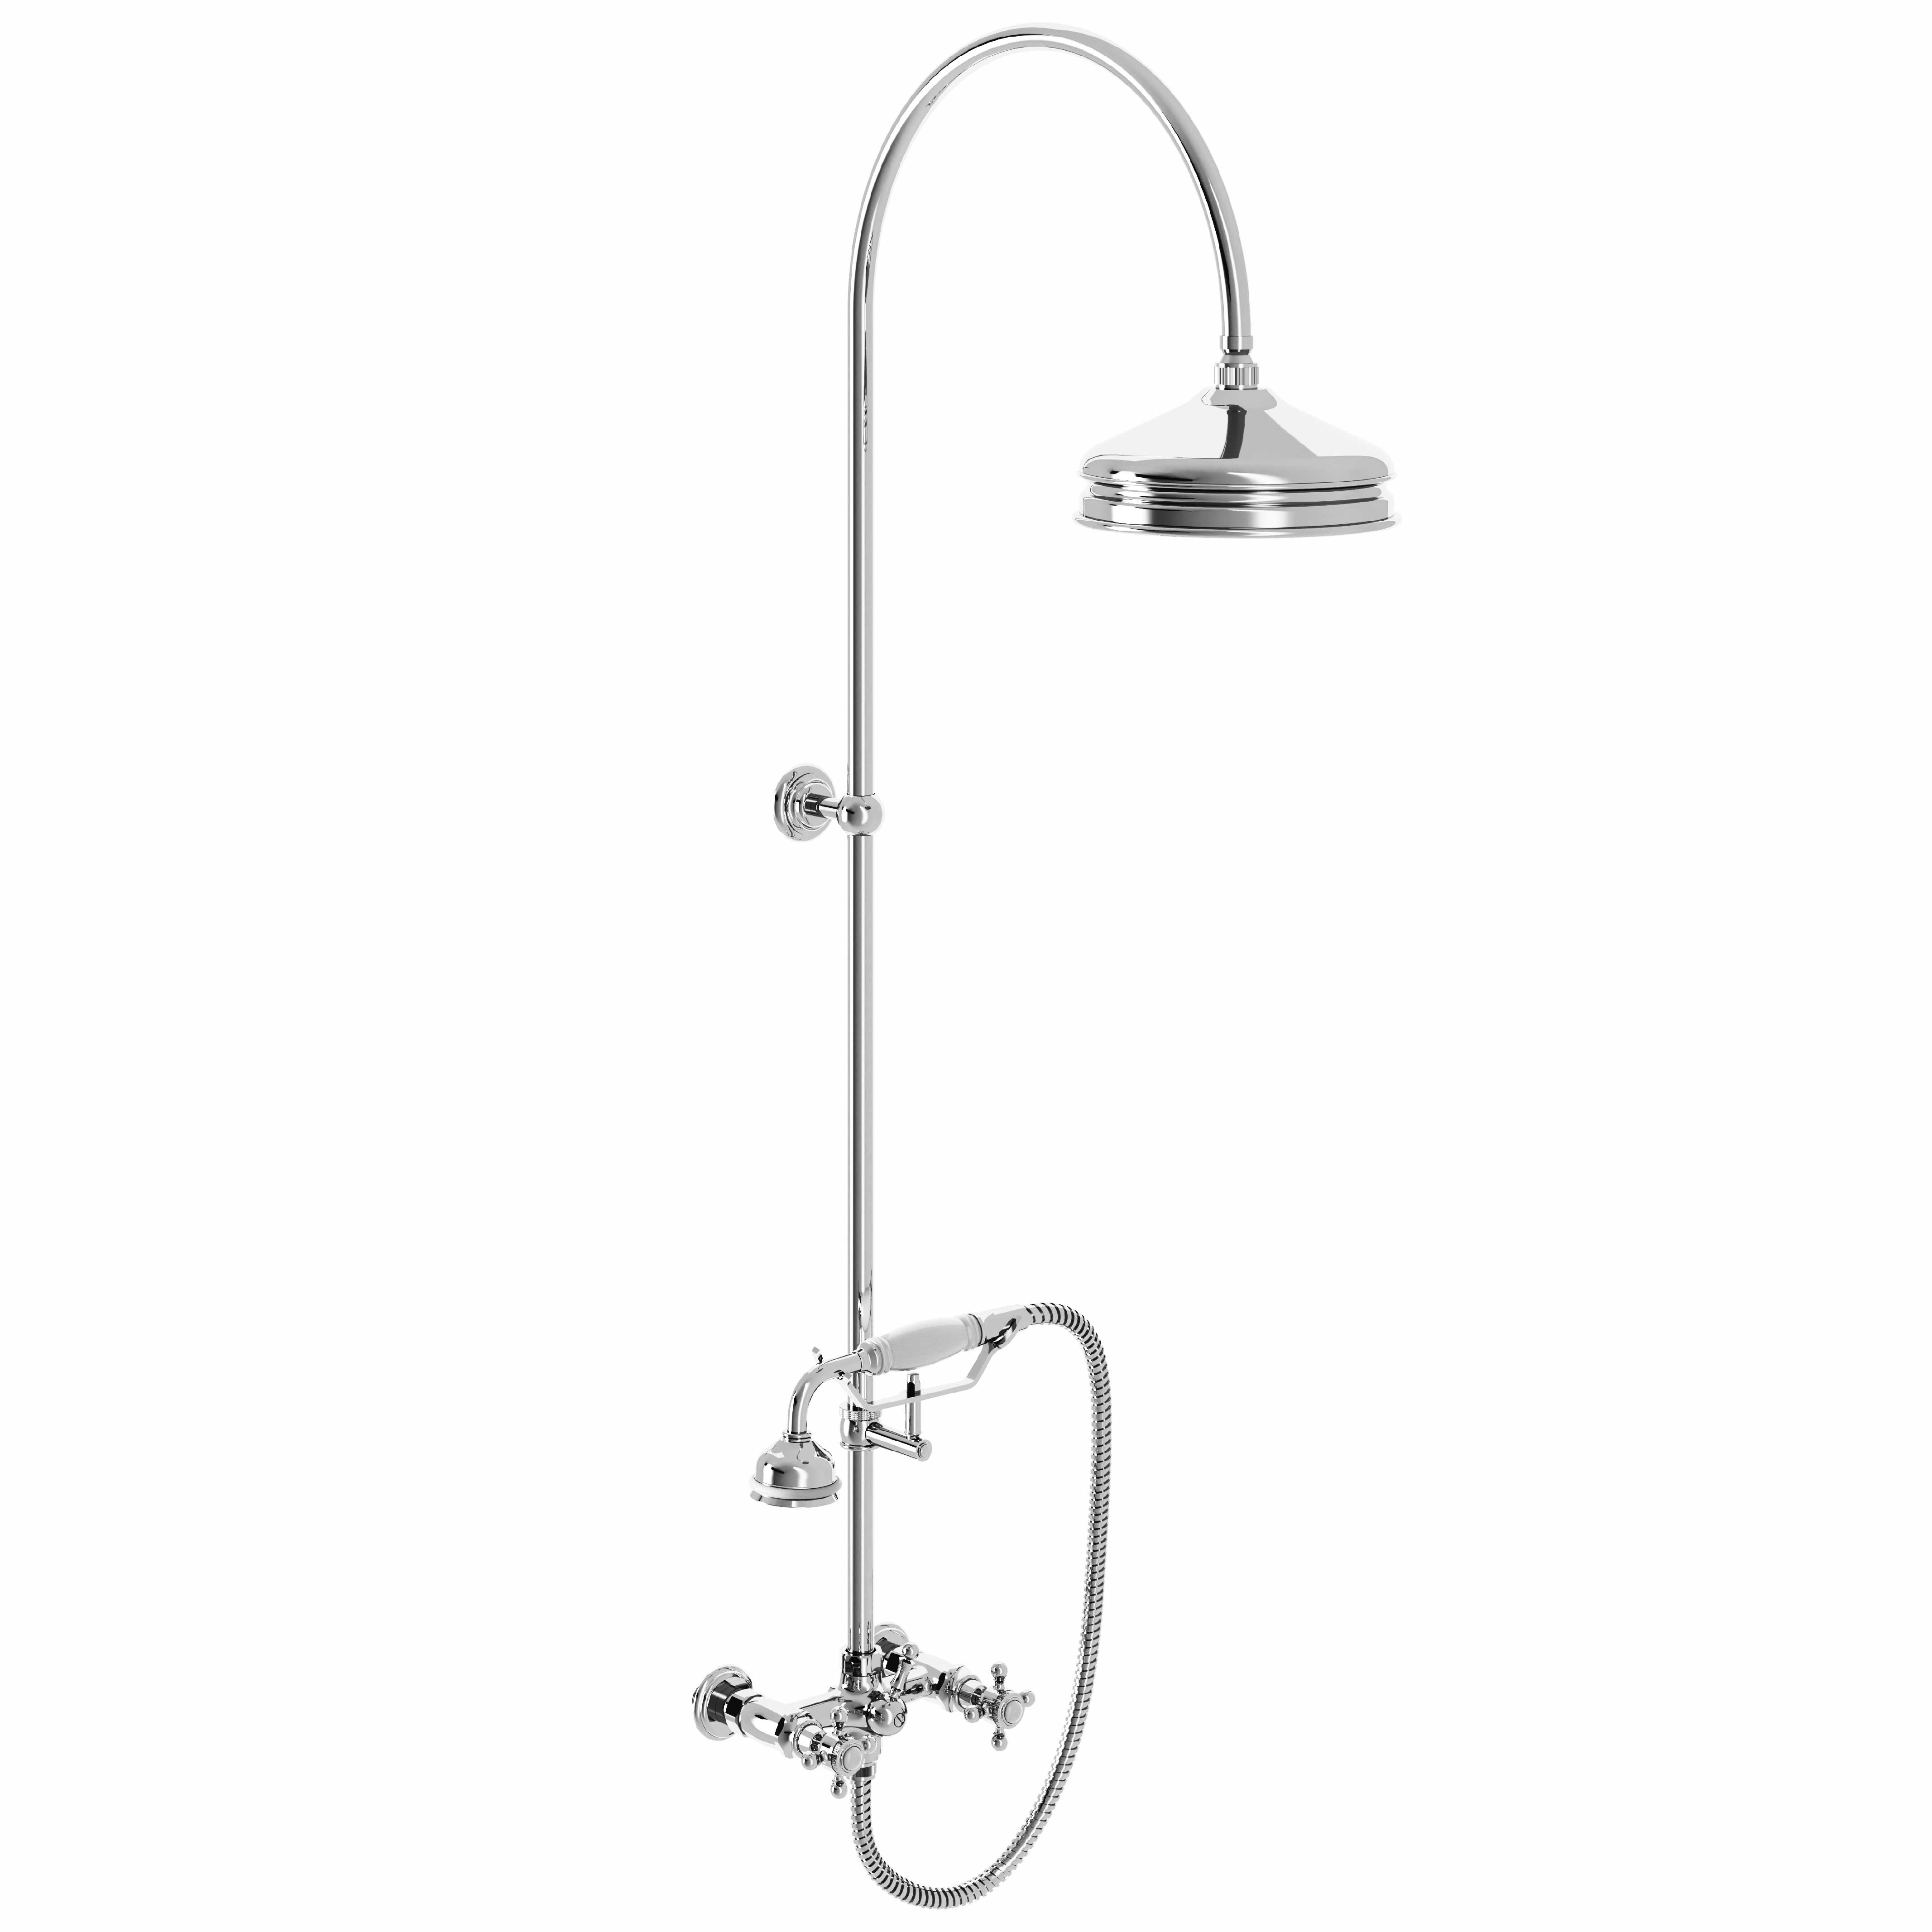 M20-2204 Shower mixer with column, anti-scaling